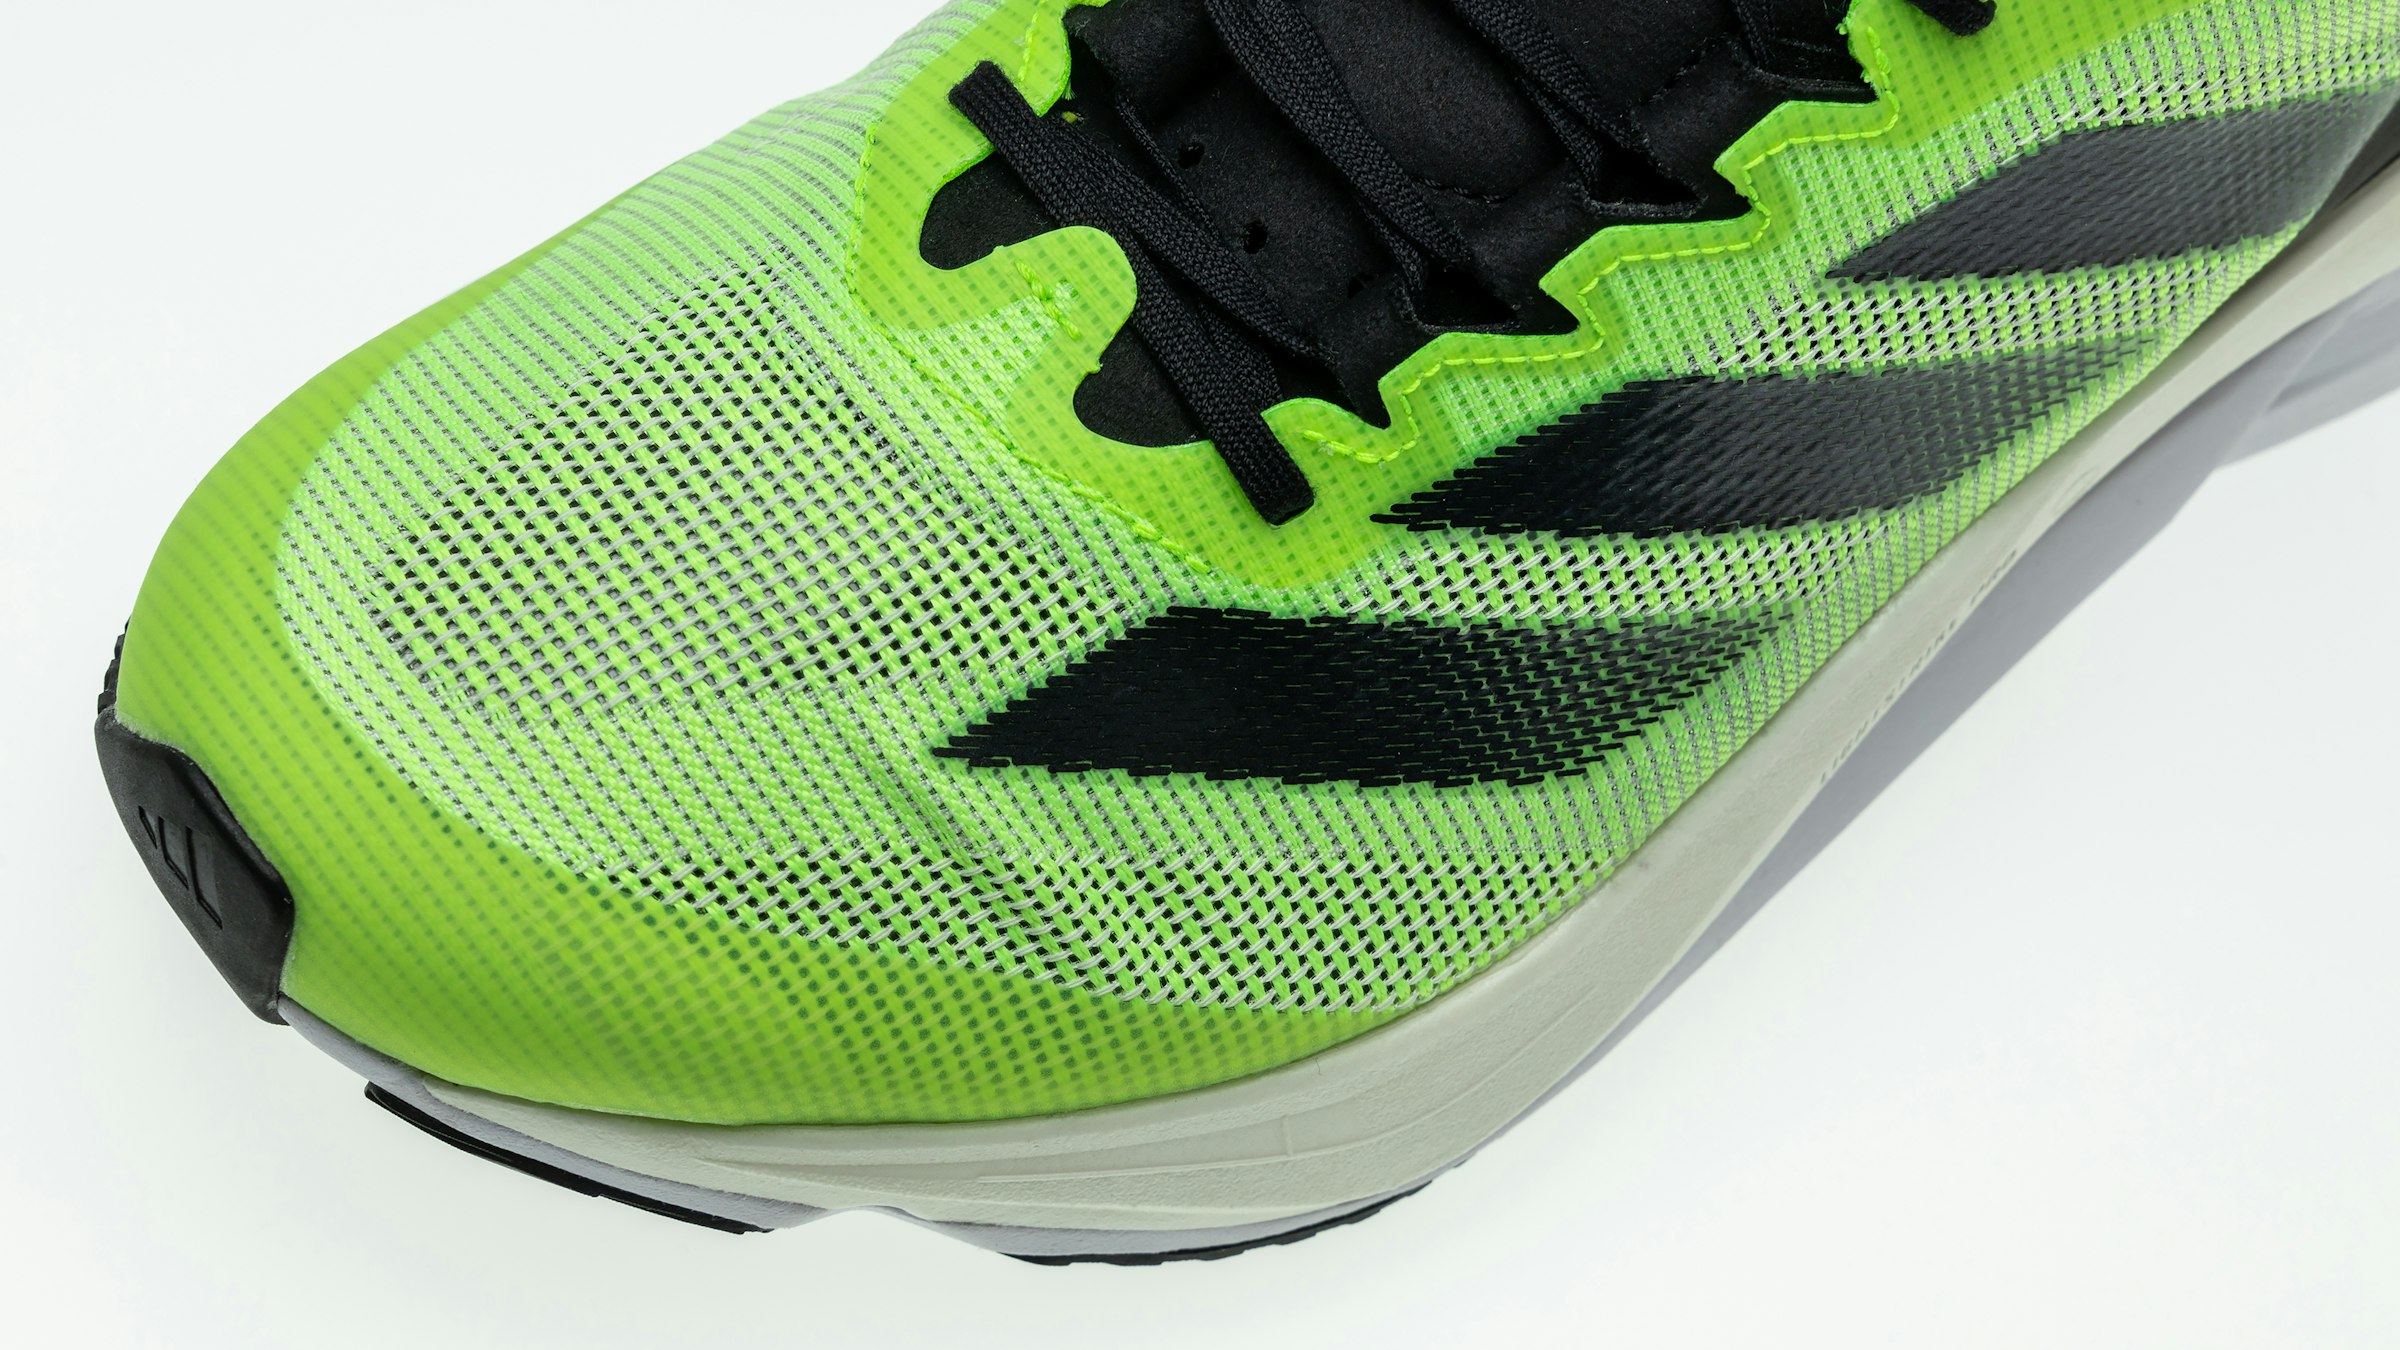 The upper is not only lightweight and breathable, but also has improved durability